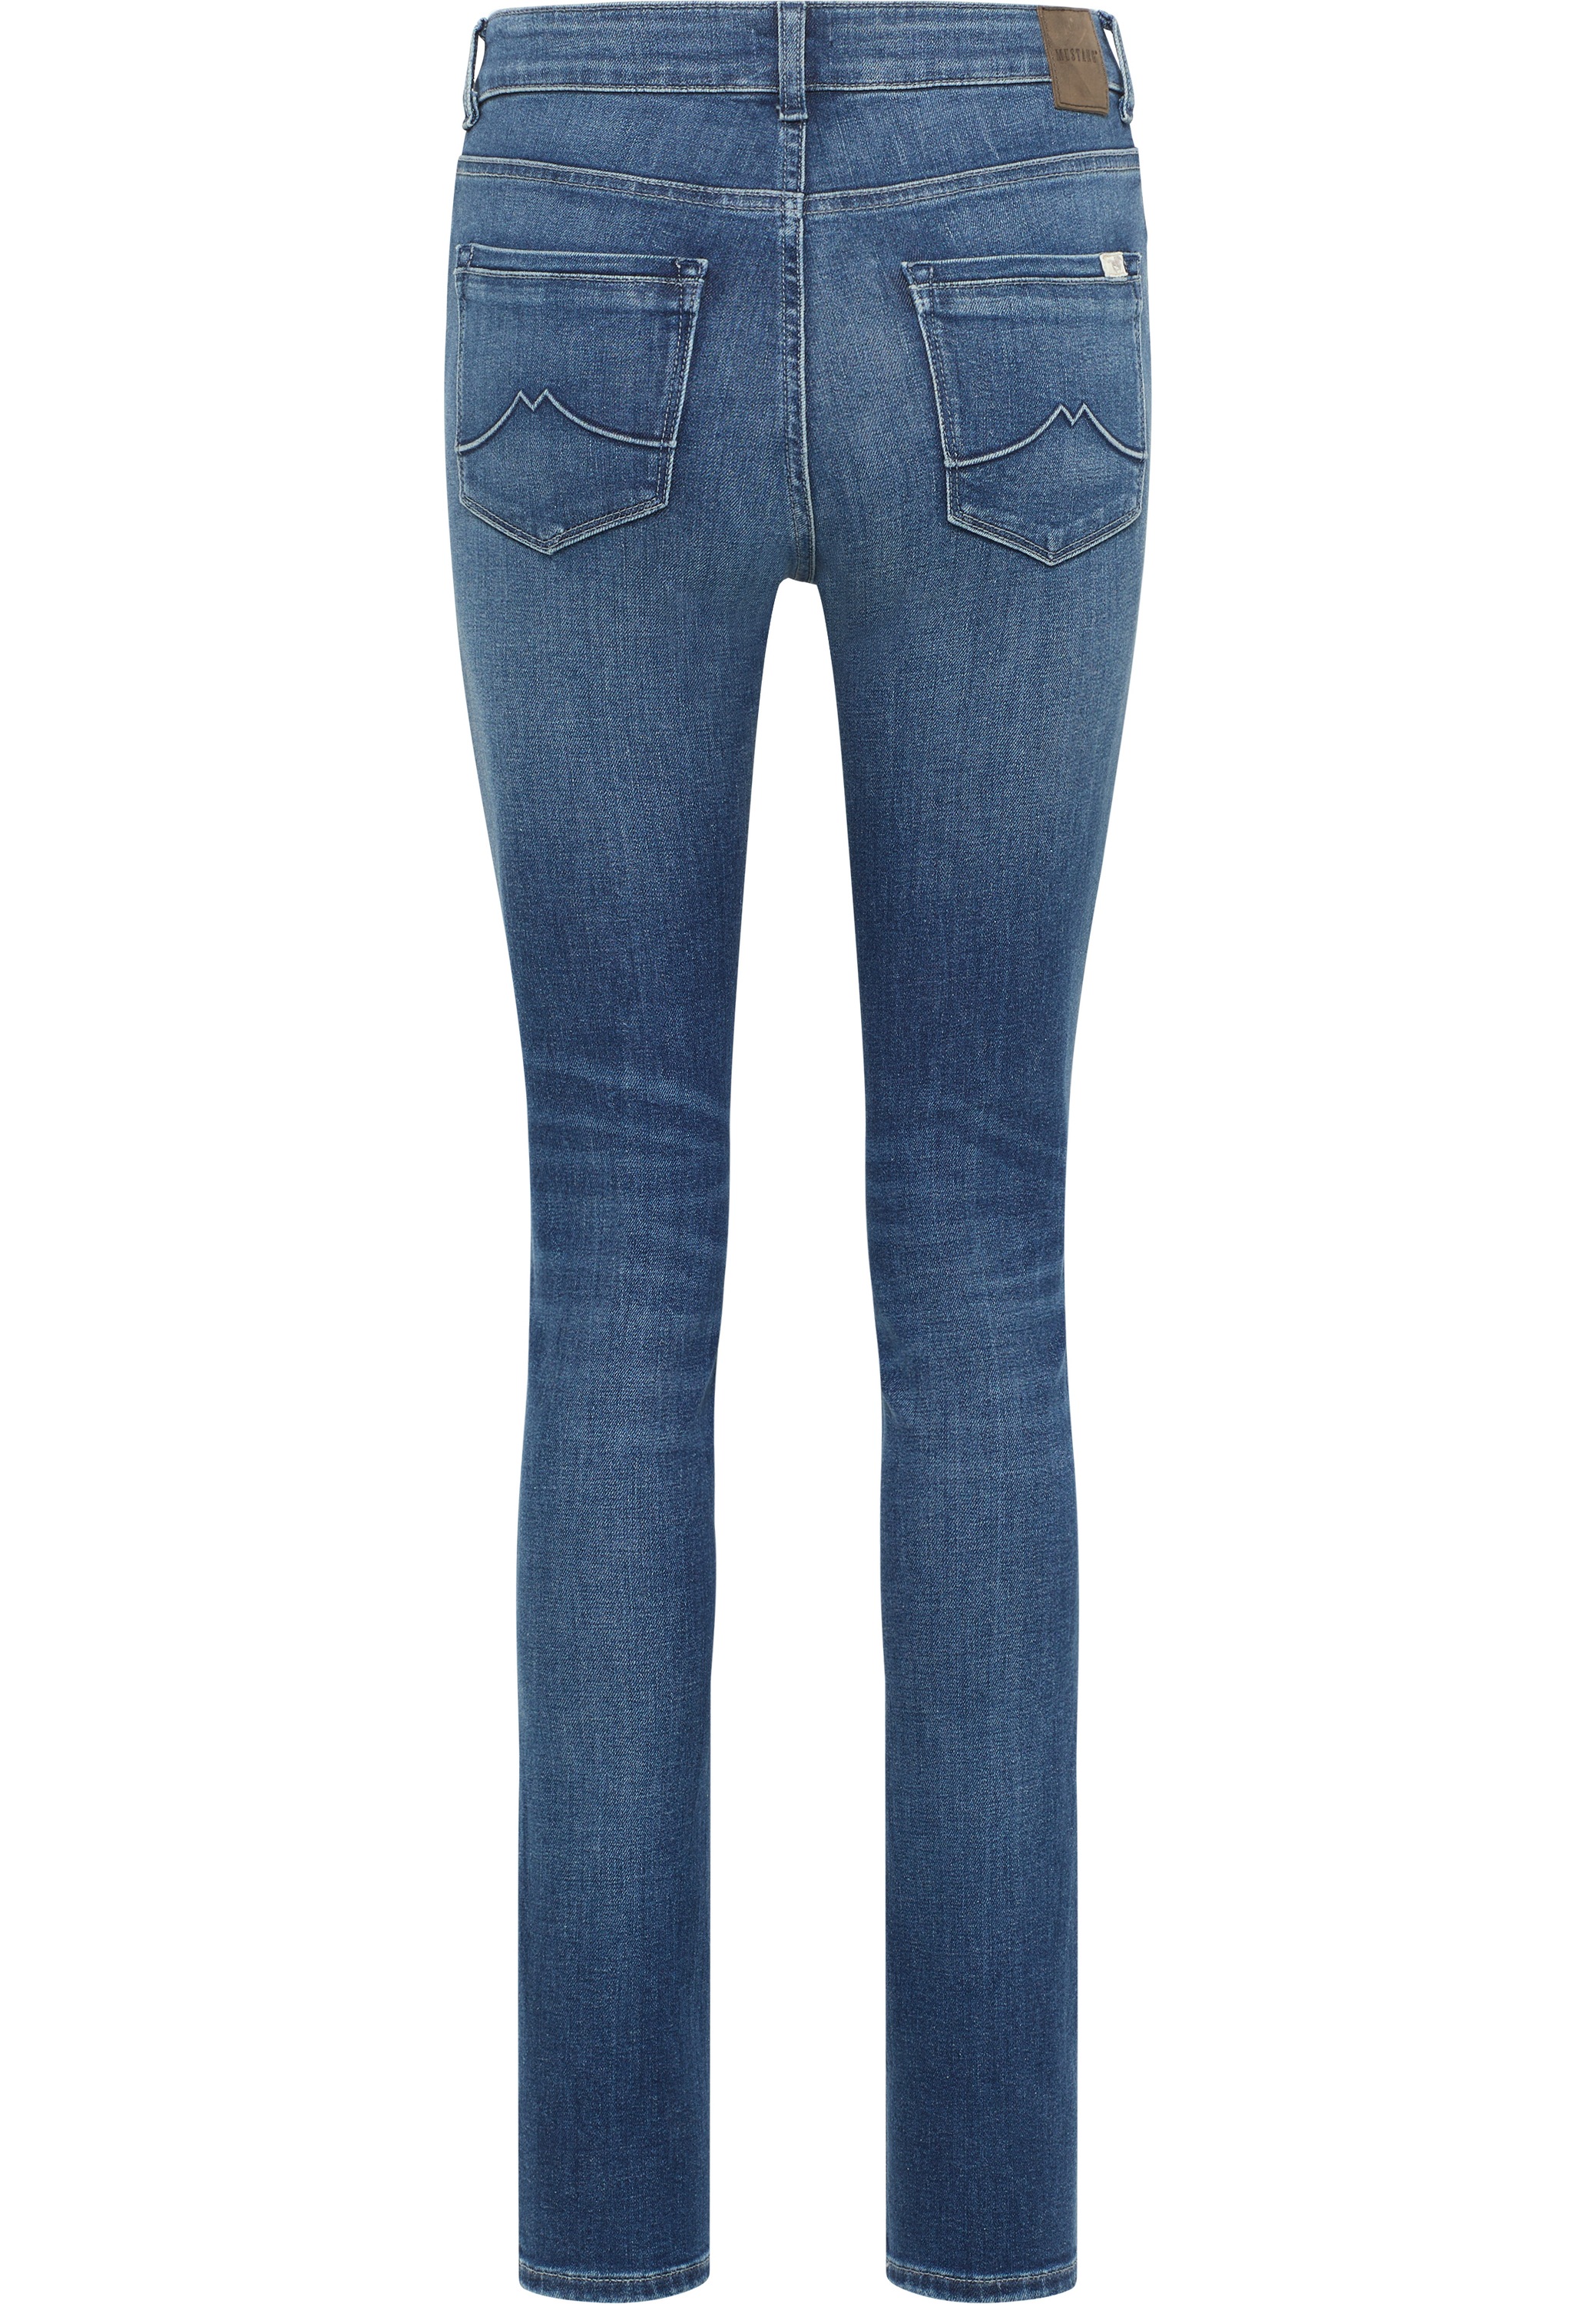 MUSTANG Slim-fit-Jeans »Shelby Slim«